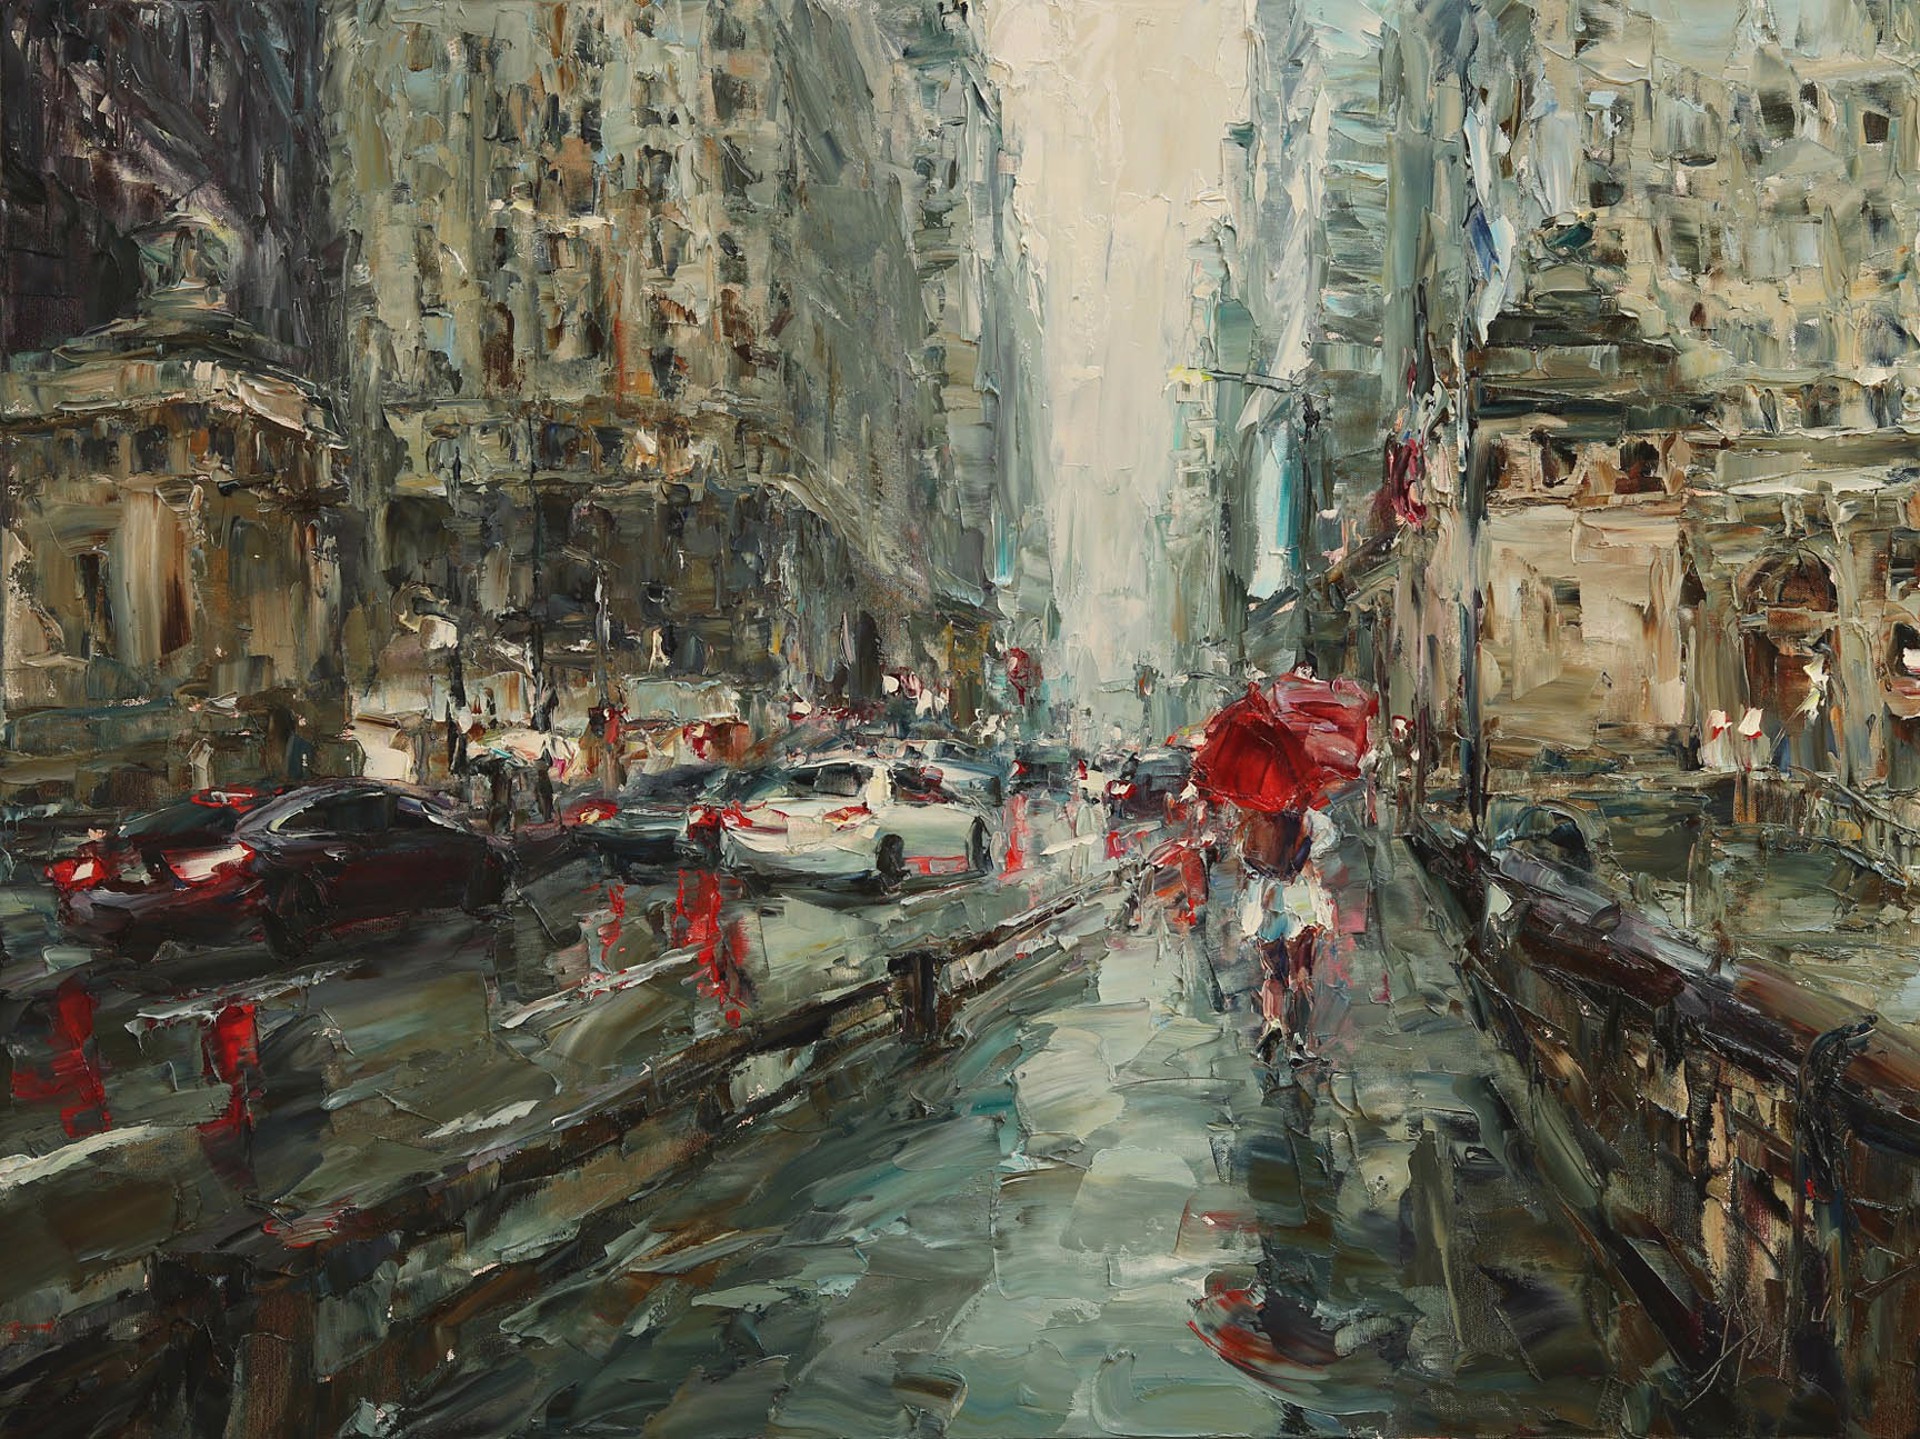 Rainy Afternoon in Chicago by Lyudmila AGRICH